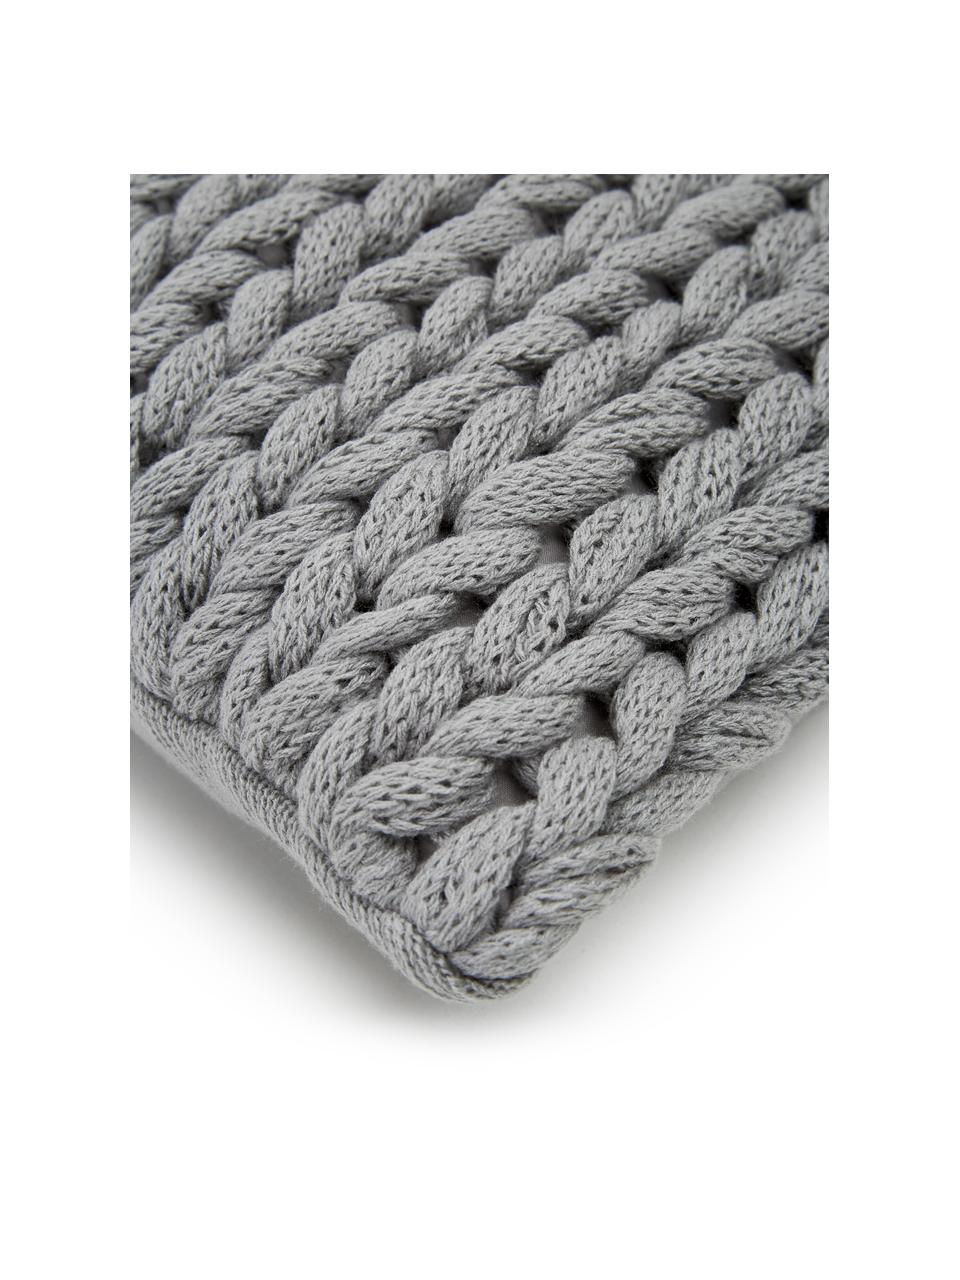 Housse de coussin grosse maille Chunky Adyna, 100 % polyacrylique, Gris clair, larg. 30 x long. 50 cm